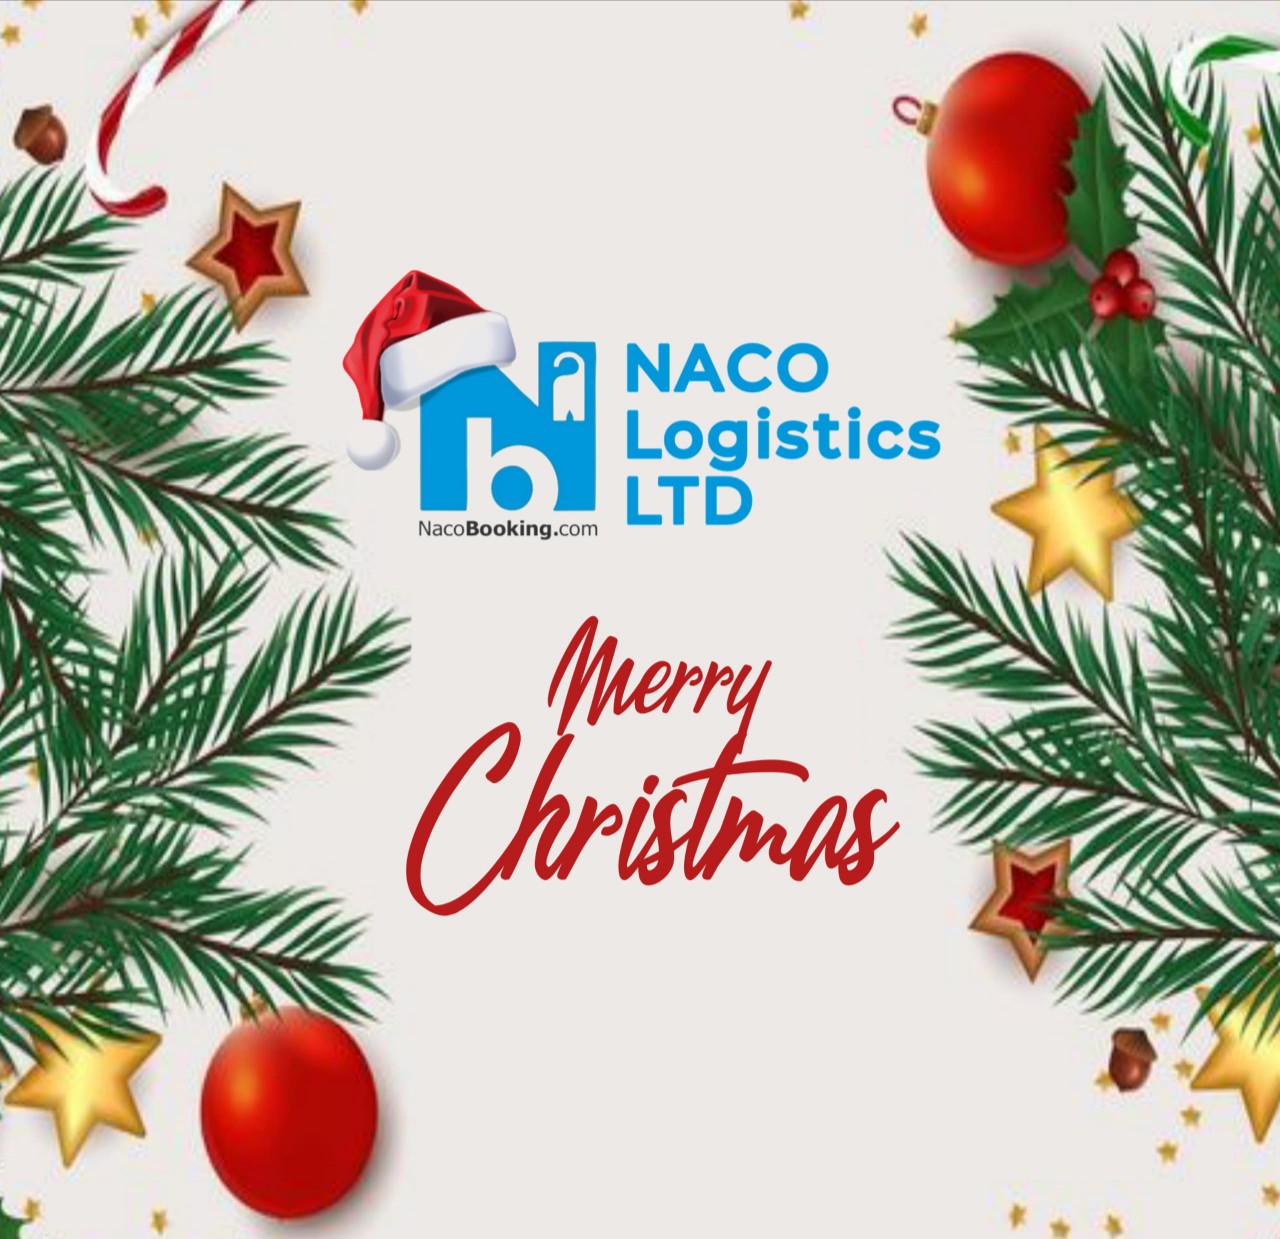 MERRY CHRISTMAS TO ALL OUR VALUED CUSTOMERS